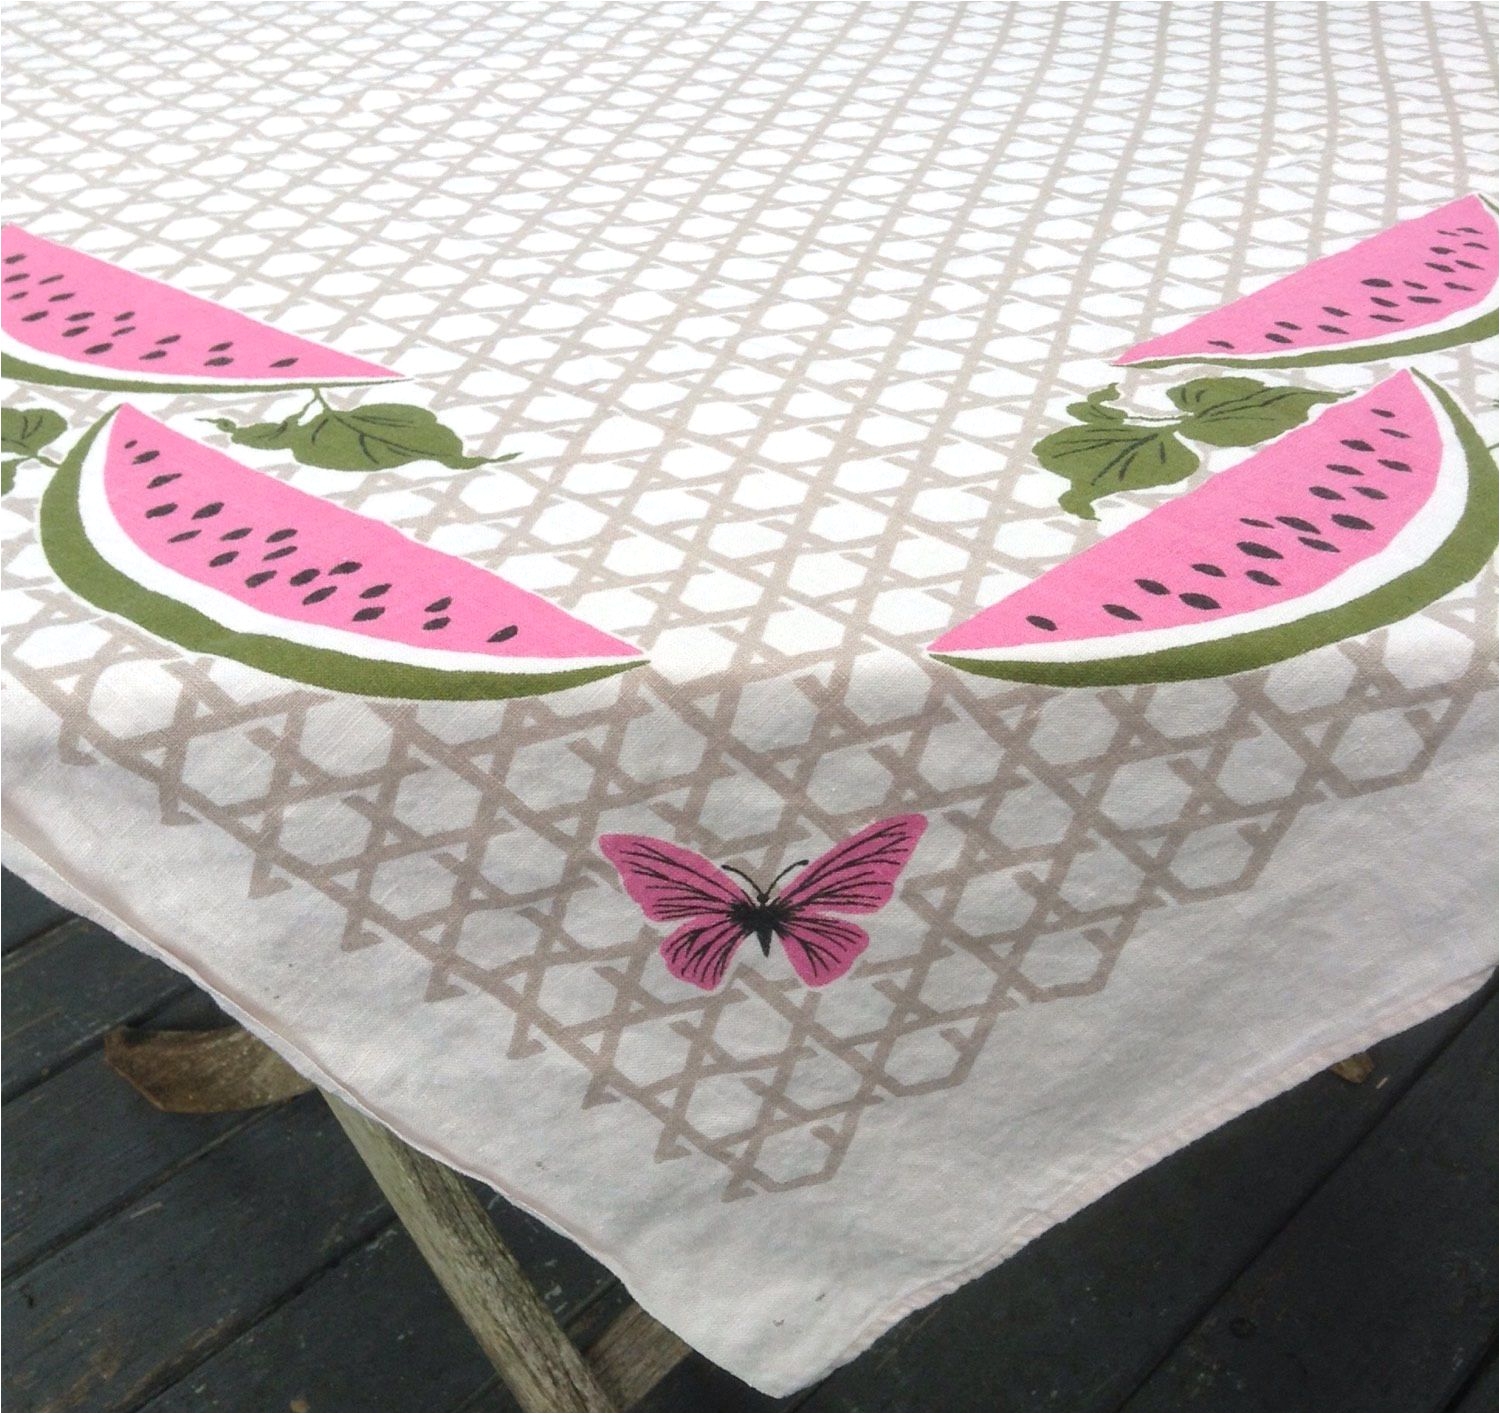 vintage shabby pink watermelons and butterflies tablecloth from my etsy shop https www